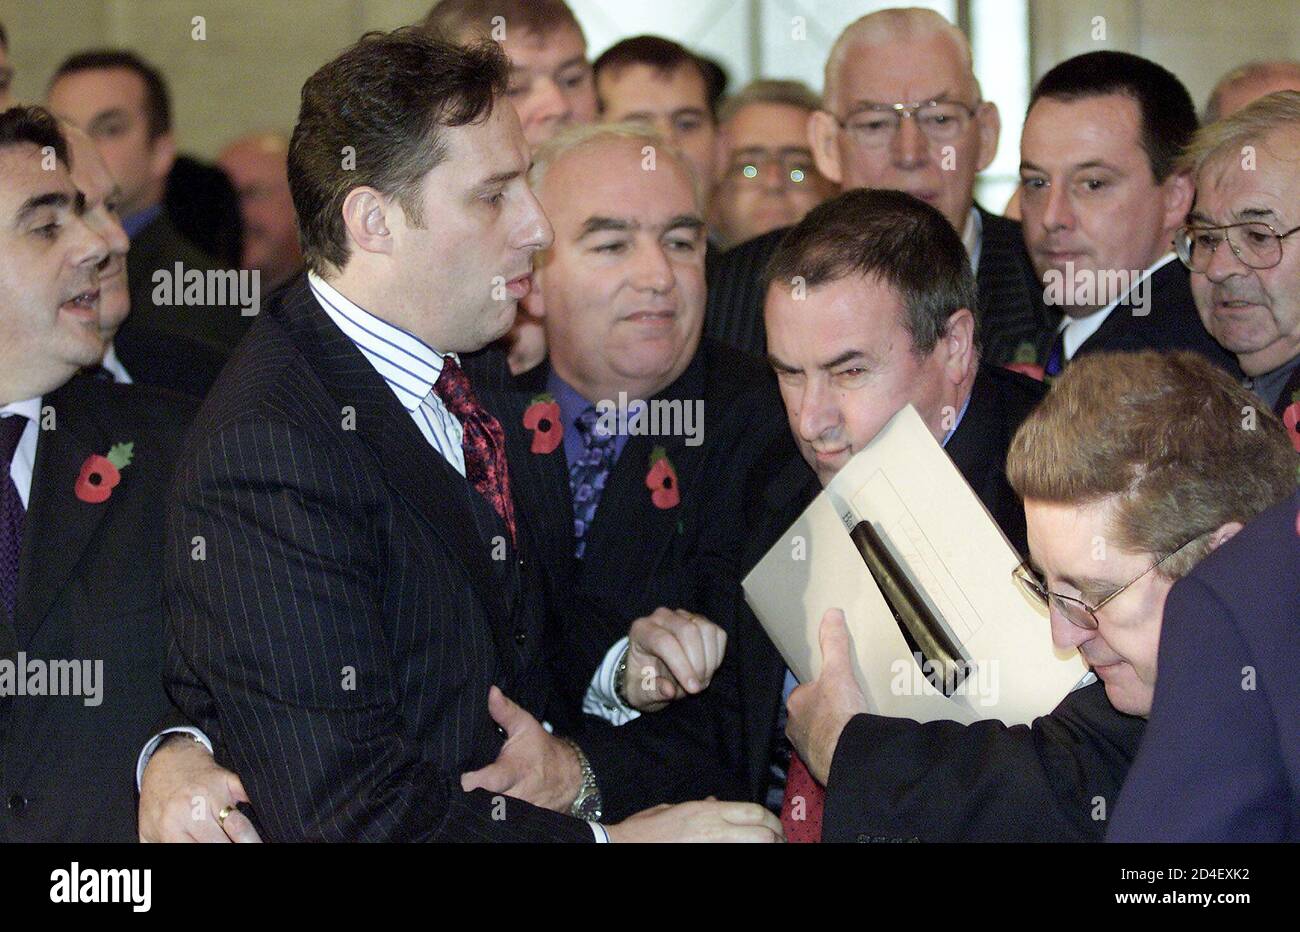 PRO AND ANTI GOOD FRIDAY AGREEMENT ASSEMBLY MEMBERS SCUFFLE FOLLOWING DAVID TRIMBLE'S RE-ELECTION AS FIRST MINISTER AT STORMONT.   Democratic Unionist Party (DUP) member Ian Paisley Jr (Lnd 2) tussles with Sinn Fein chairman Mitchell McLaughlin (2nd R, holding papers) and Alistair McDonald (bottom right) of Social Democratic and Labour Party (SDLP) during a heated argument as DUP leader Ian Paisley (rear 3rd R) looks on at Stormont November 6, 2001. Scuffles broke out between pro and anti Good Friday Agreement Assemblymen as newly re-elected First Minister David Trimble gave an acceptance spee Stock Photo